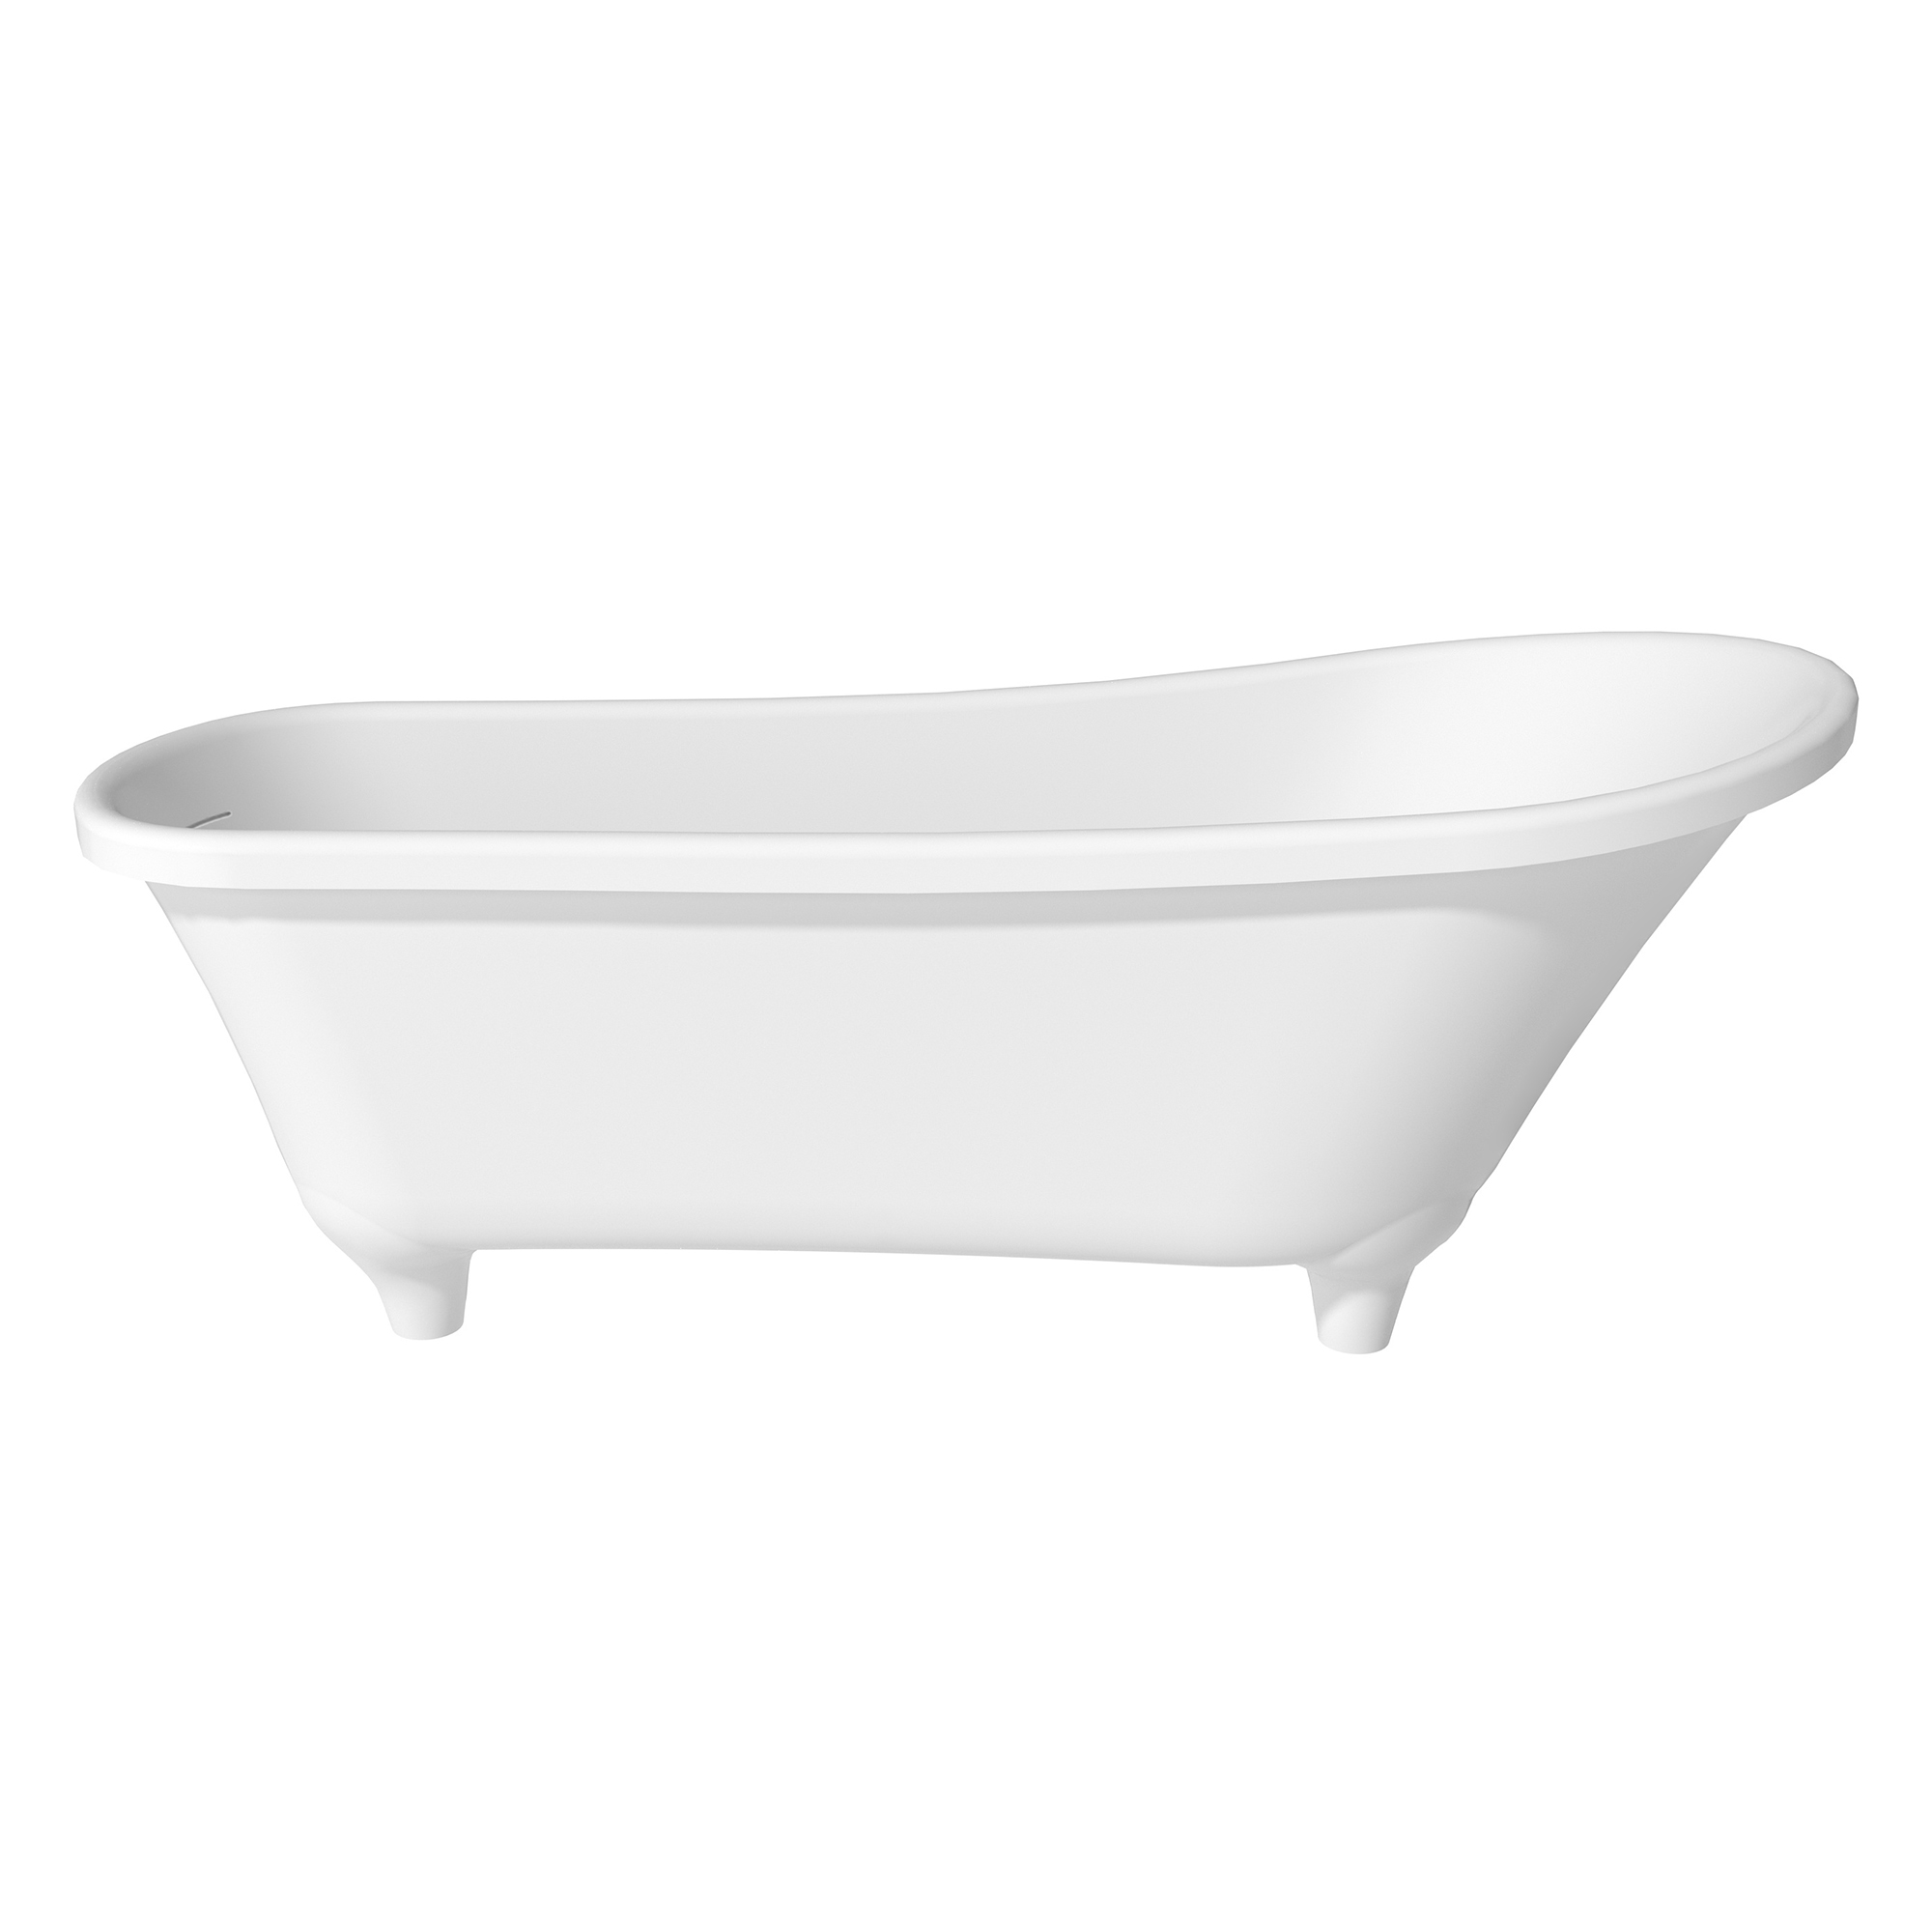 69" Matte White Freestanding Soaking Tub with Elevated Pedestal – Adult-sized,Solid Surface Stone Craftsmanship for a Classical Aesthetic(With/without Bathtub Faucet)